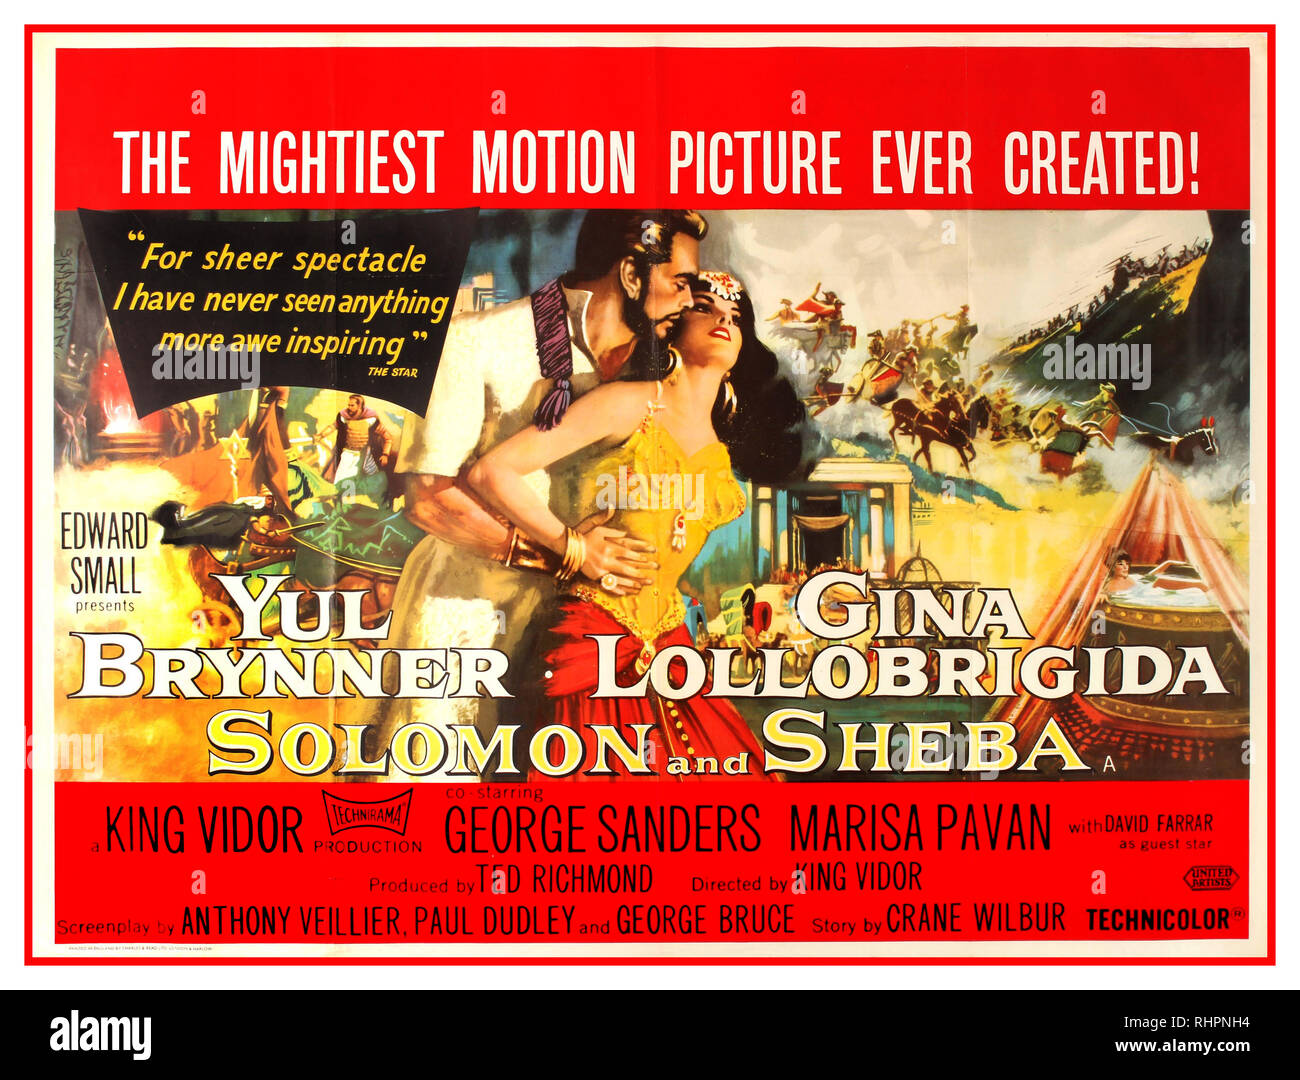 Vintage movie poster for the UK release of Solomon and Sheba, a 1959 American epic historical romance film directed by King Vidor, shot in Technirama (color by Technicolor), and distributed by United Artists.The film dramatizes events described in The Bible—the tenth chapter of the First Kings and the ninth chapter of Second Chronicles. It starred Yul Brynner as Solomon and Gina Lollobrigida as Sheba; and features George Sanders as Adonijah, Marisa Pavan as Abishag, and David Farrar as the Pharaoh. The screenplay by Anthony Veiller, Paul Dudley, and George Bruce. Stock Photo